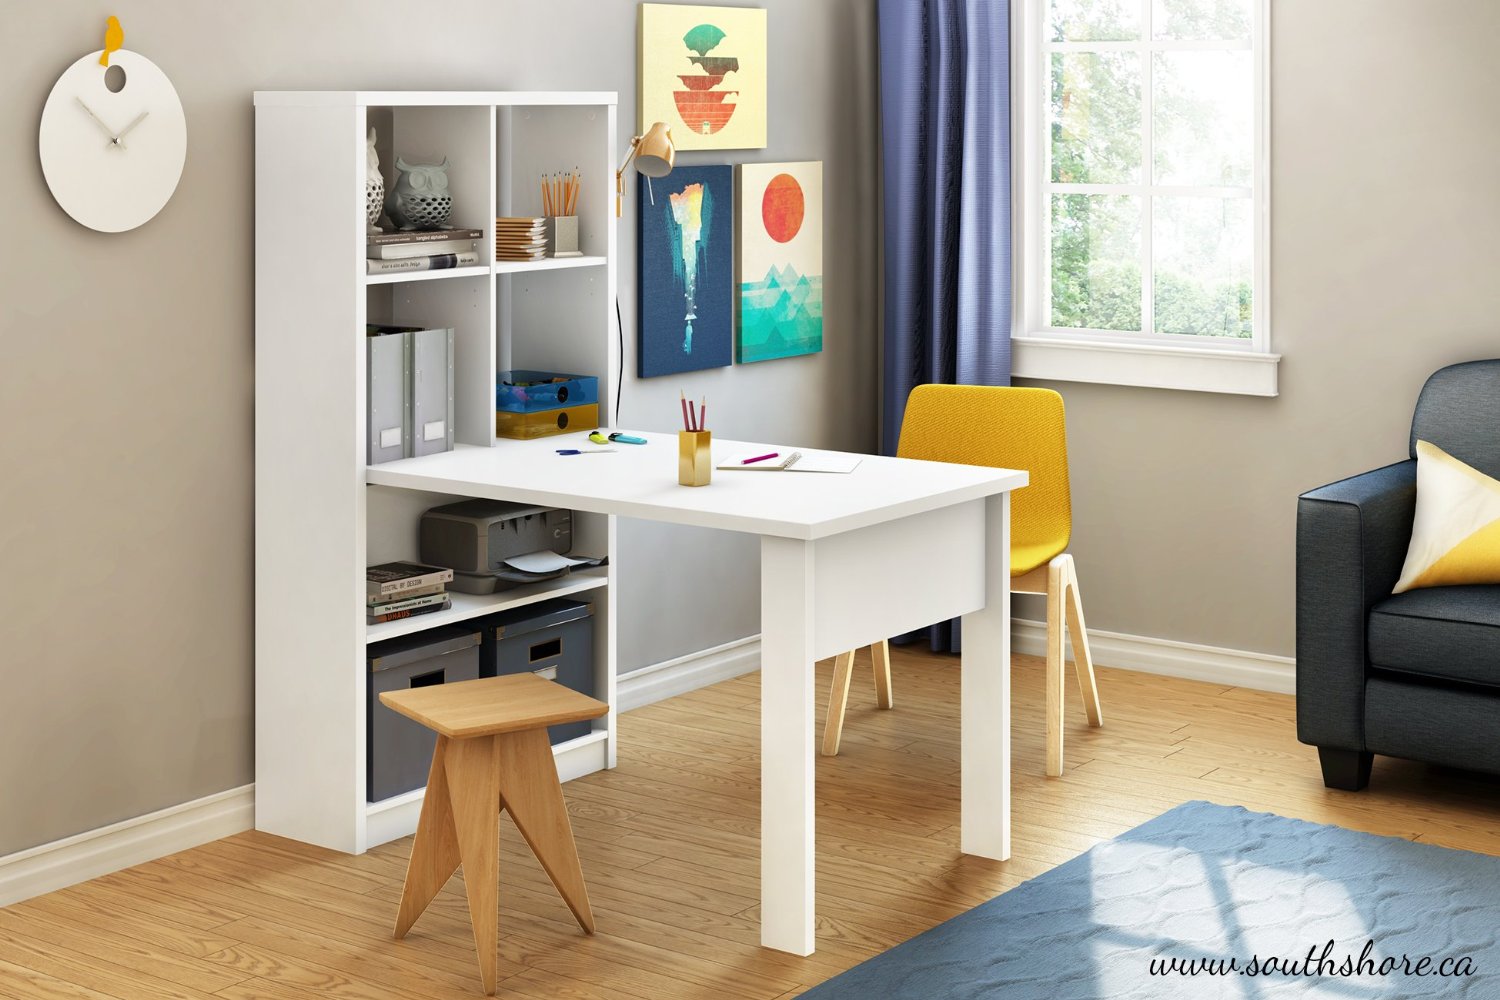 Craft Tables and Furniture for your Craft Room | Are you looking for some great craft tables to organize and spruce up your craft or sewing room. Click through to see some amazing craft tables that will have your room looking amazing! www.sewwhatalicia.com